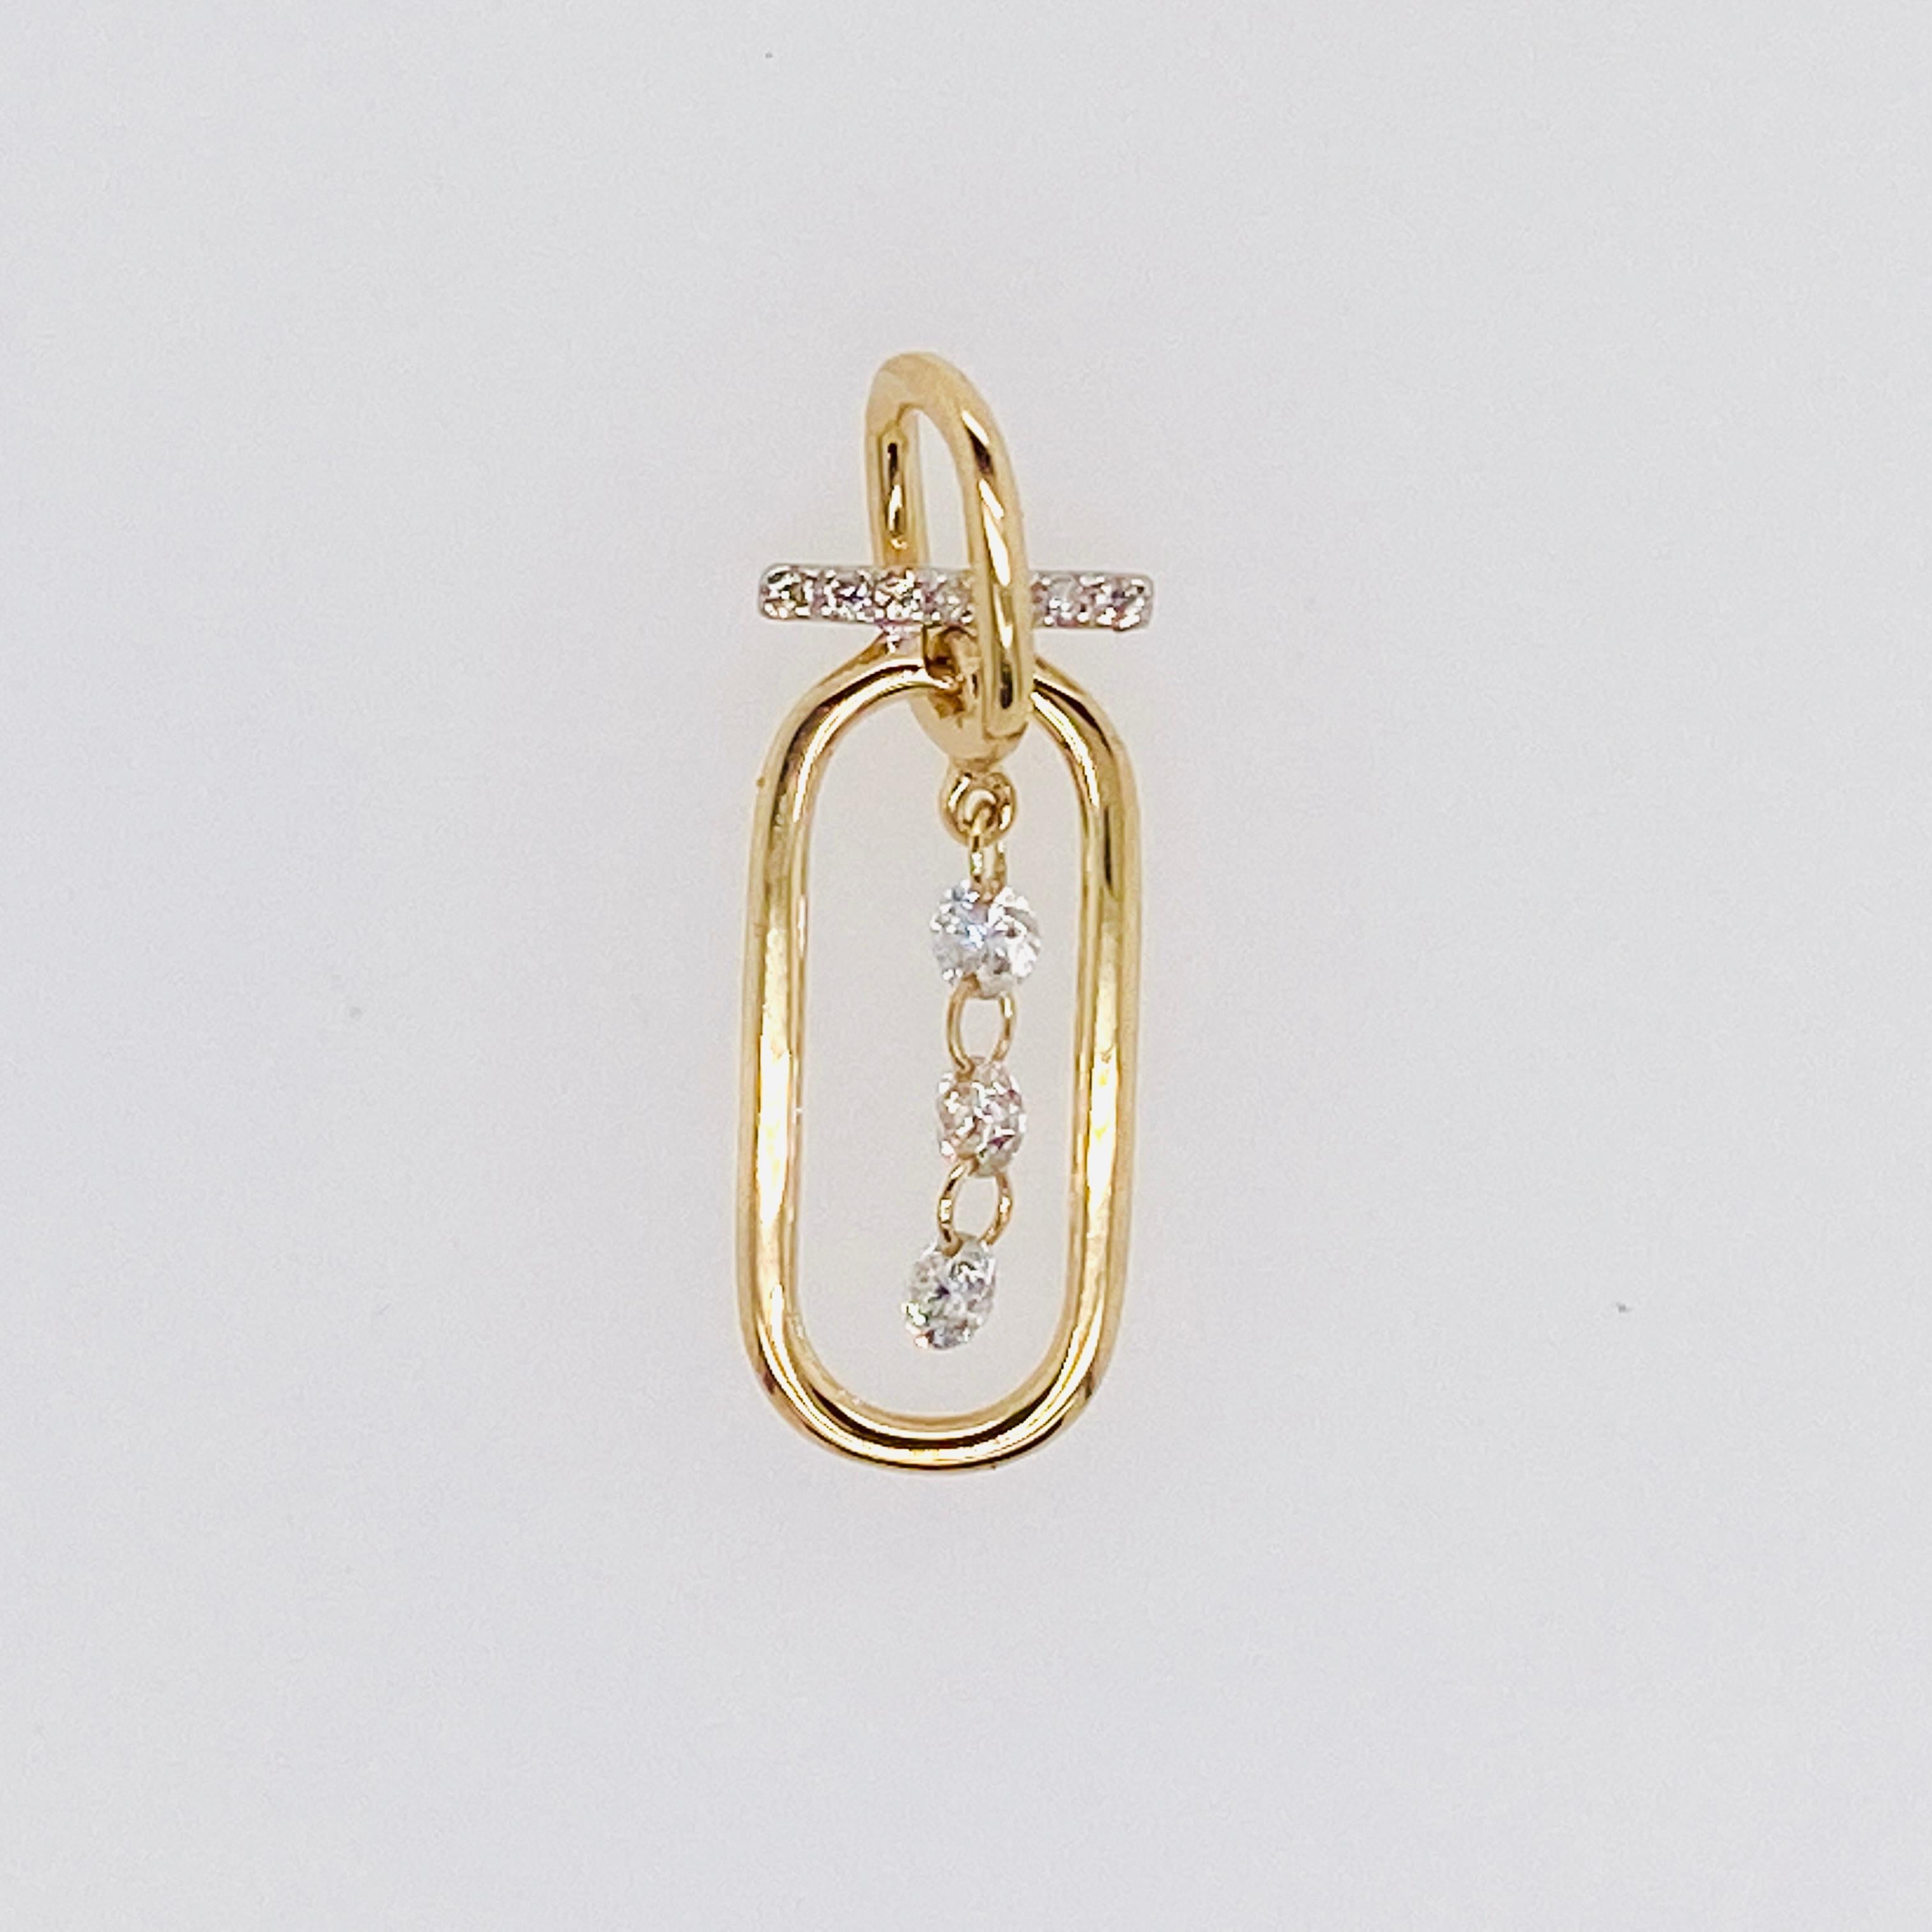 Three diamonds dance inside this bright paperclip pendant frame that measures ~3/4 inch long and 1/2 inch wide. The diamonds are linked together through pierced edges to make a nearly invisible connection as they sway together in their frame. The